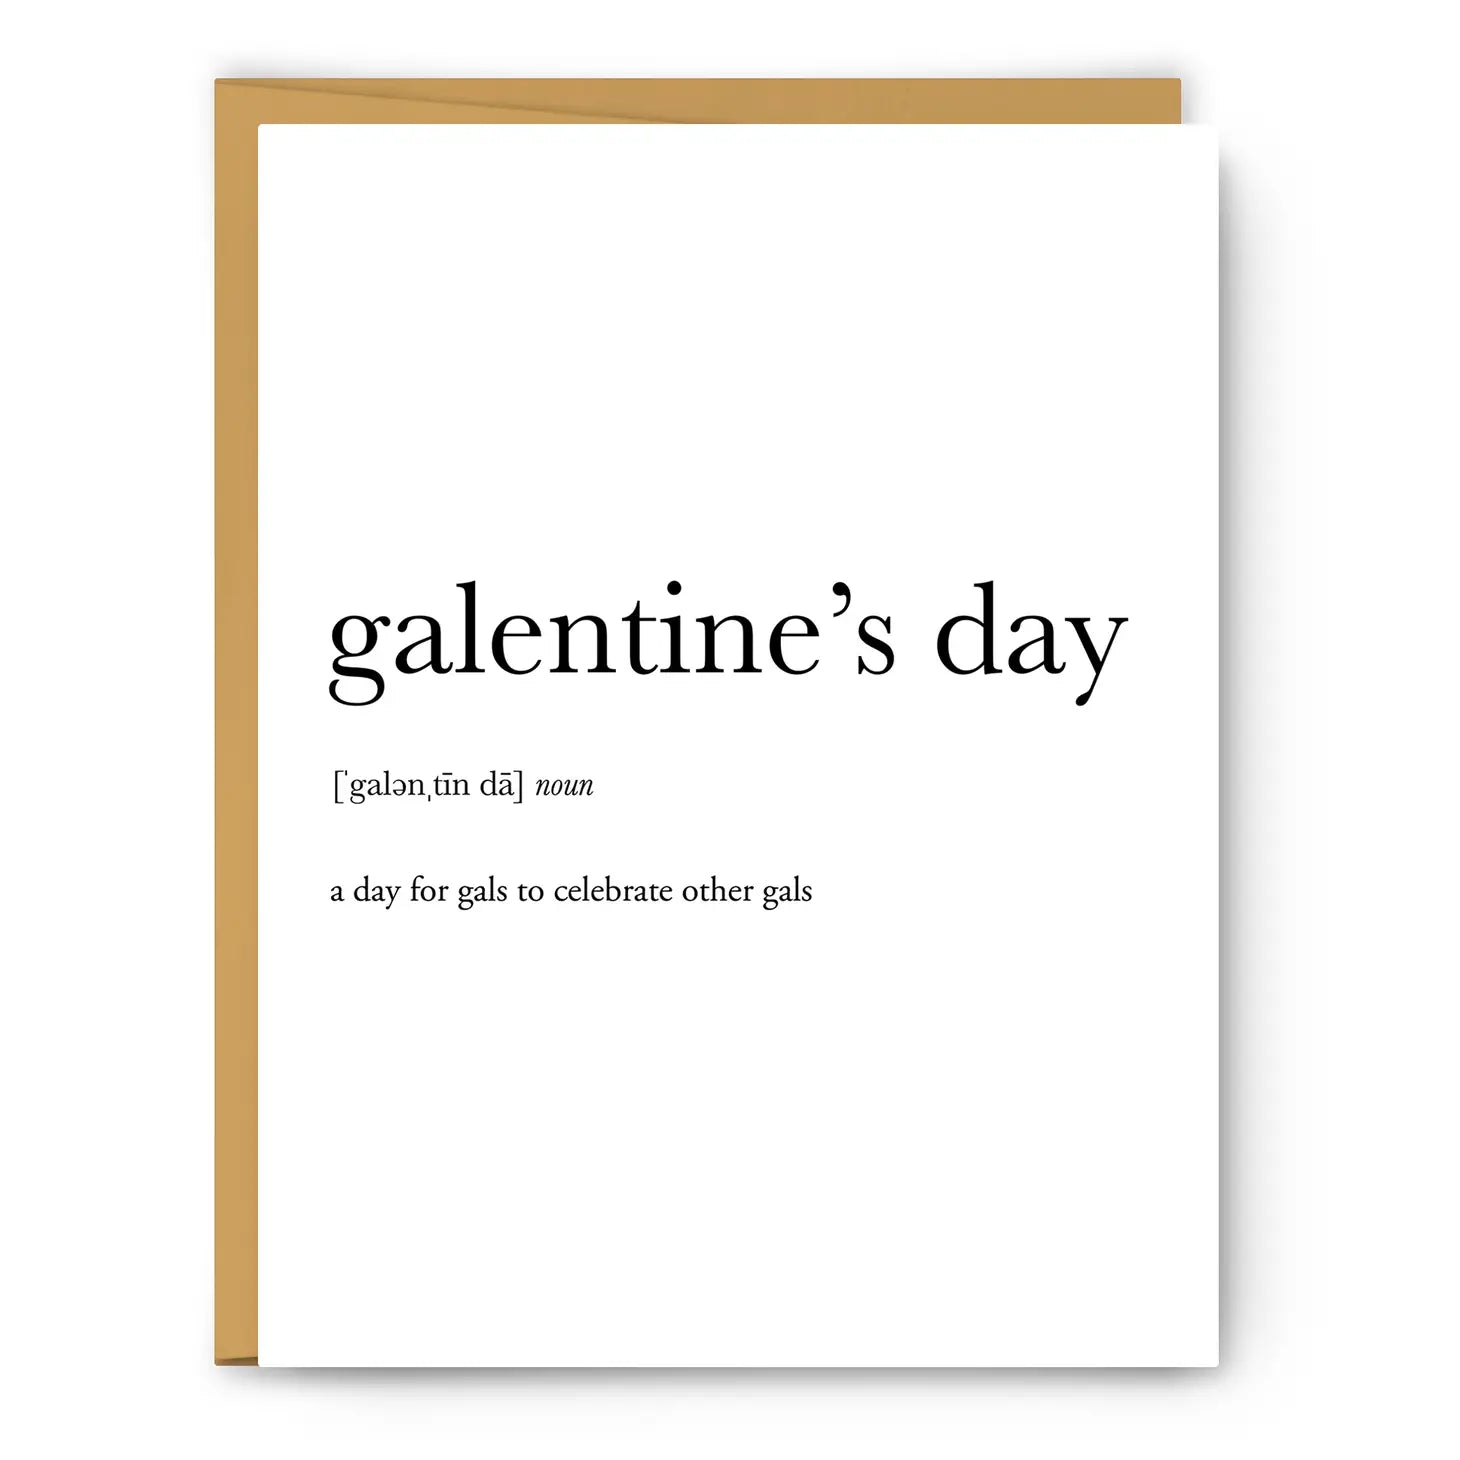 Definition Greeting Card: Galentine's Day